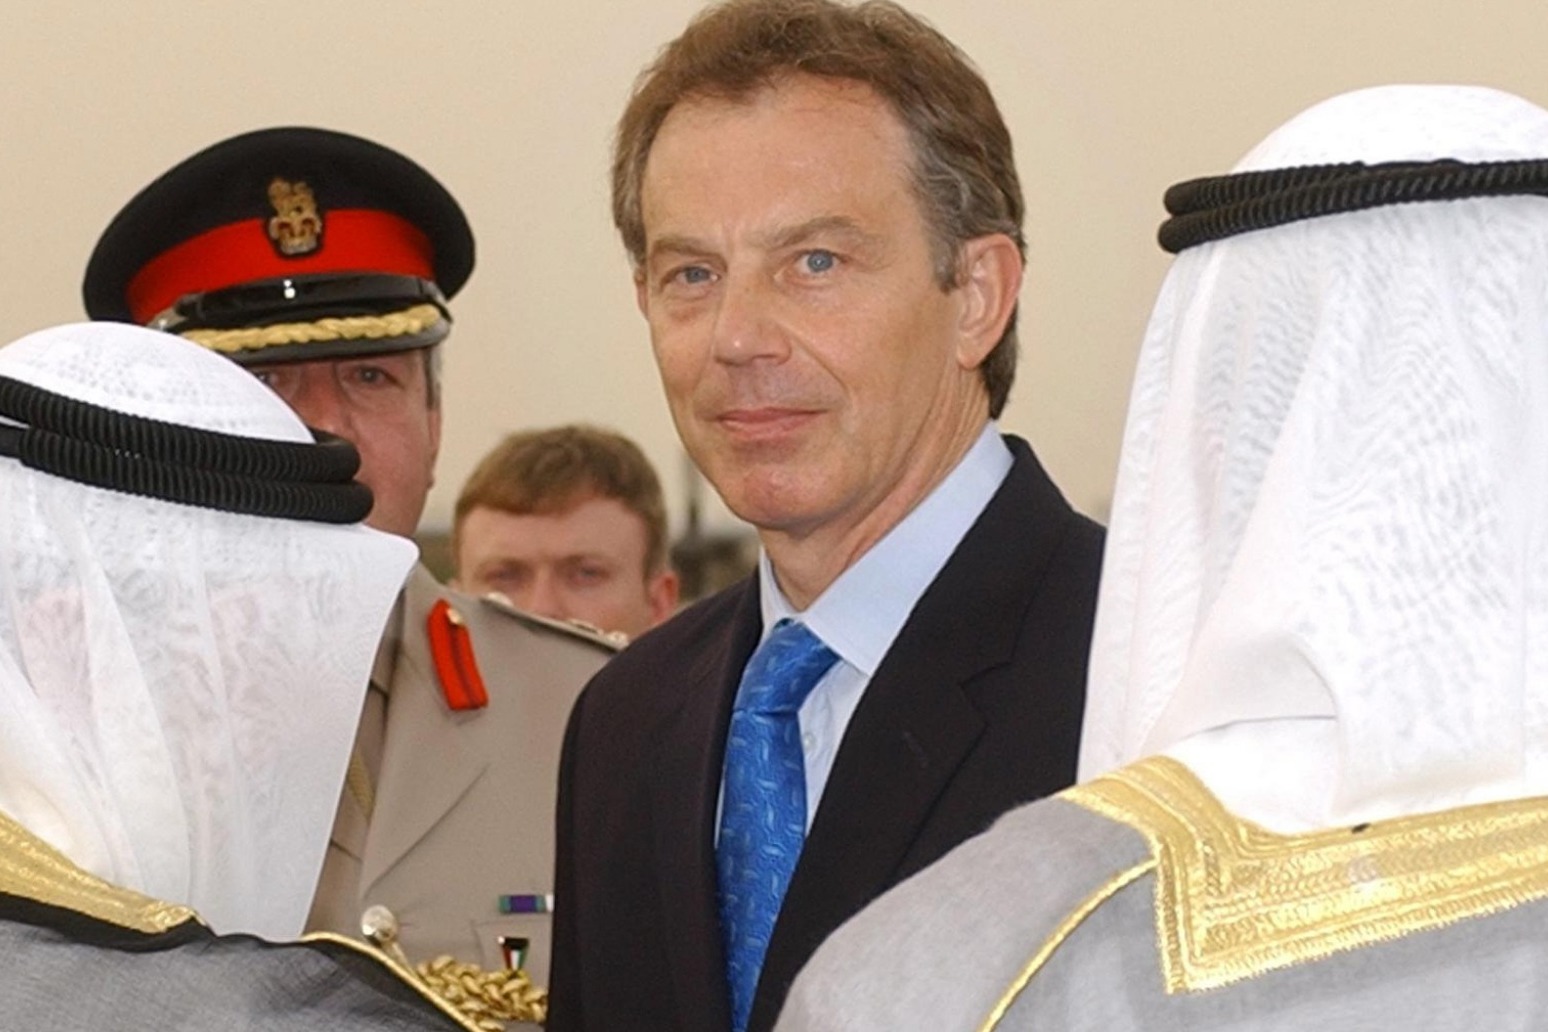 Blair begged Kuwait for arms deal as thank you for Gulf War help, papers suggest 